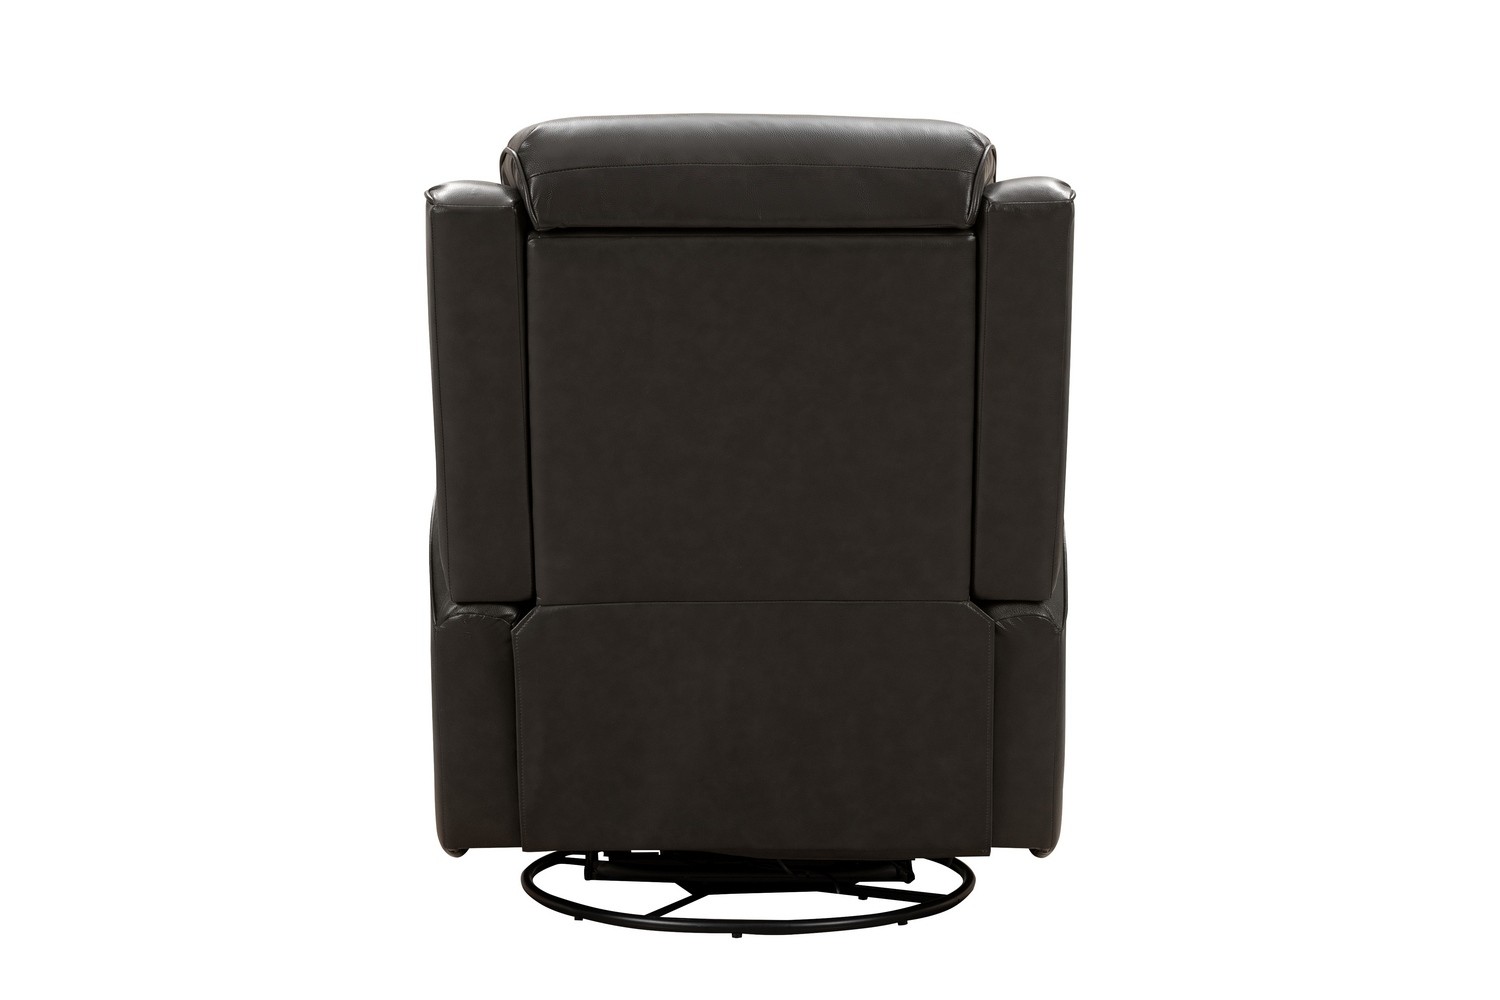 Barcalounger Kennedy Big and Tall Power Swivel Recliner Chair with Power Head Rest - Matteo Smokey Gray/Leather Match